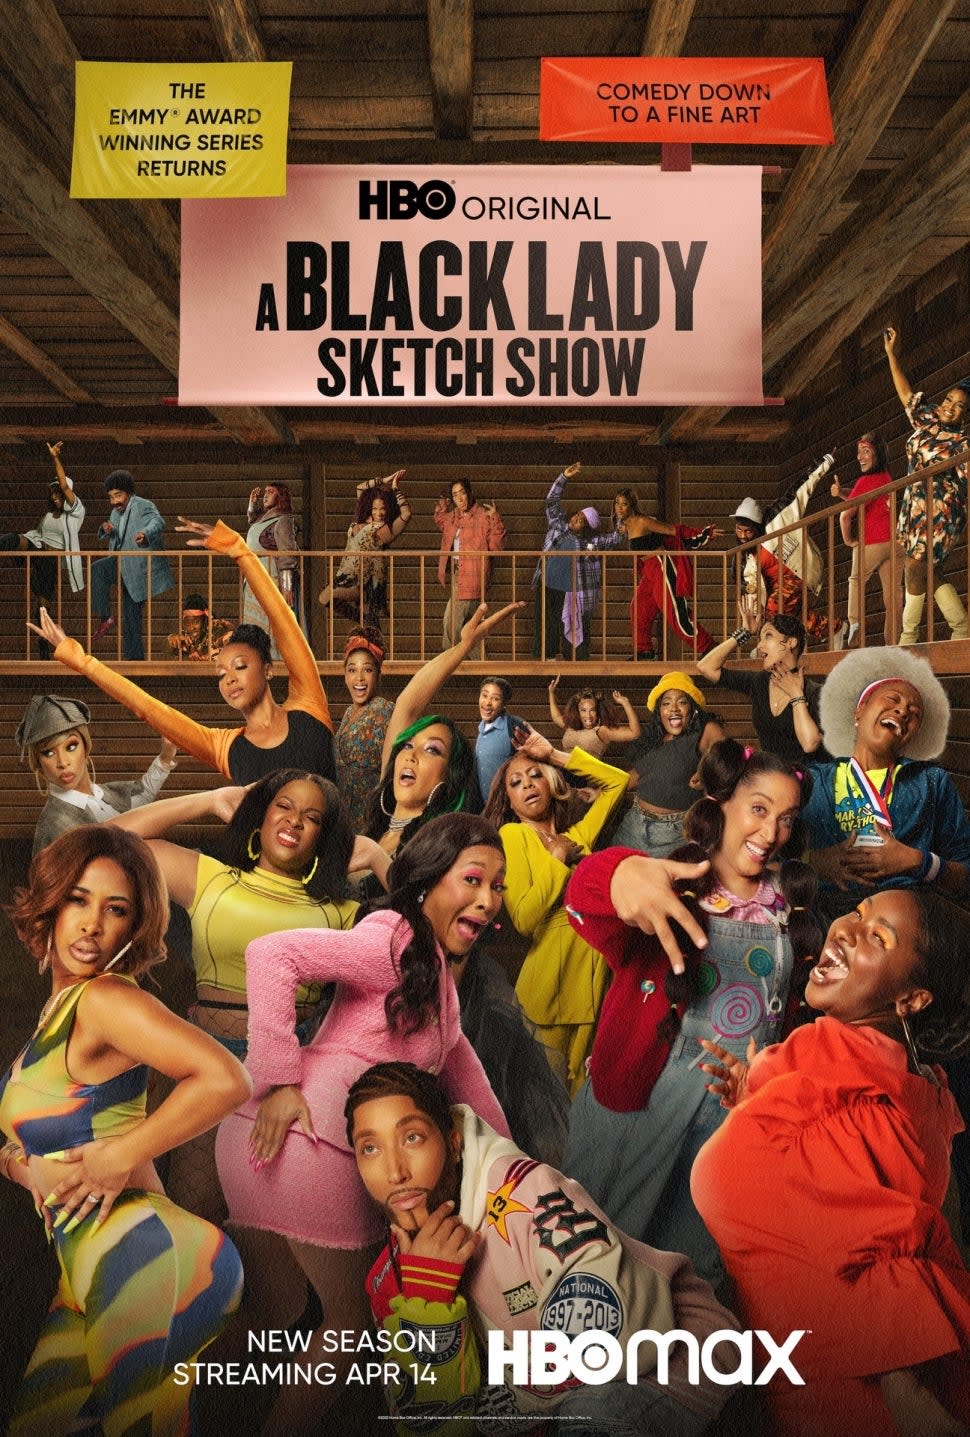 A Black Lady Sketch Show Drops Season 4 Trailer With New Players